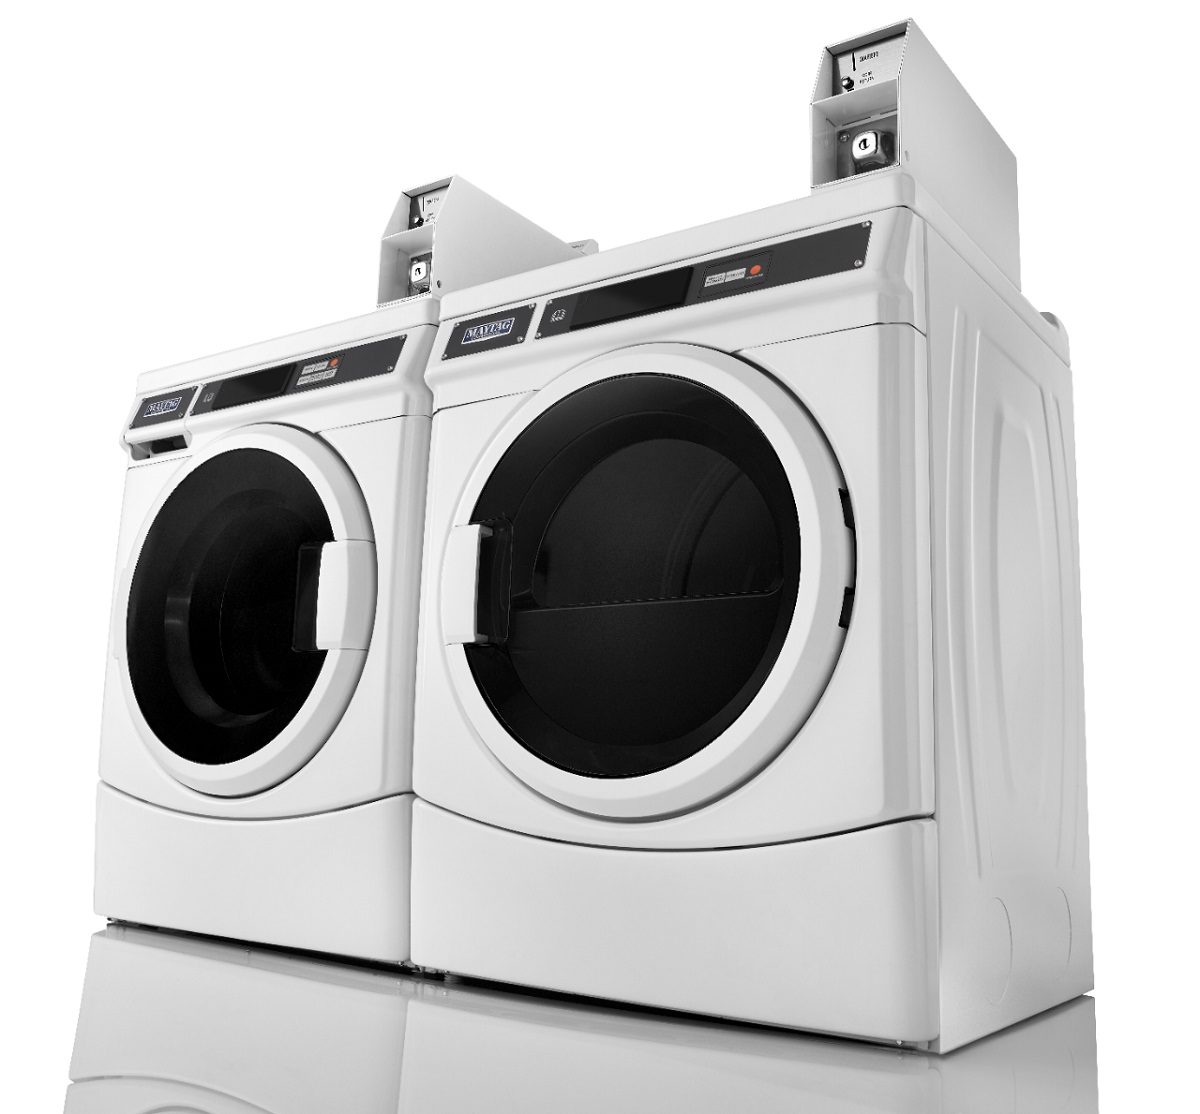 Maytag Commercial Washer How To Use